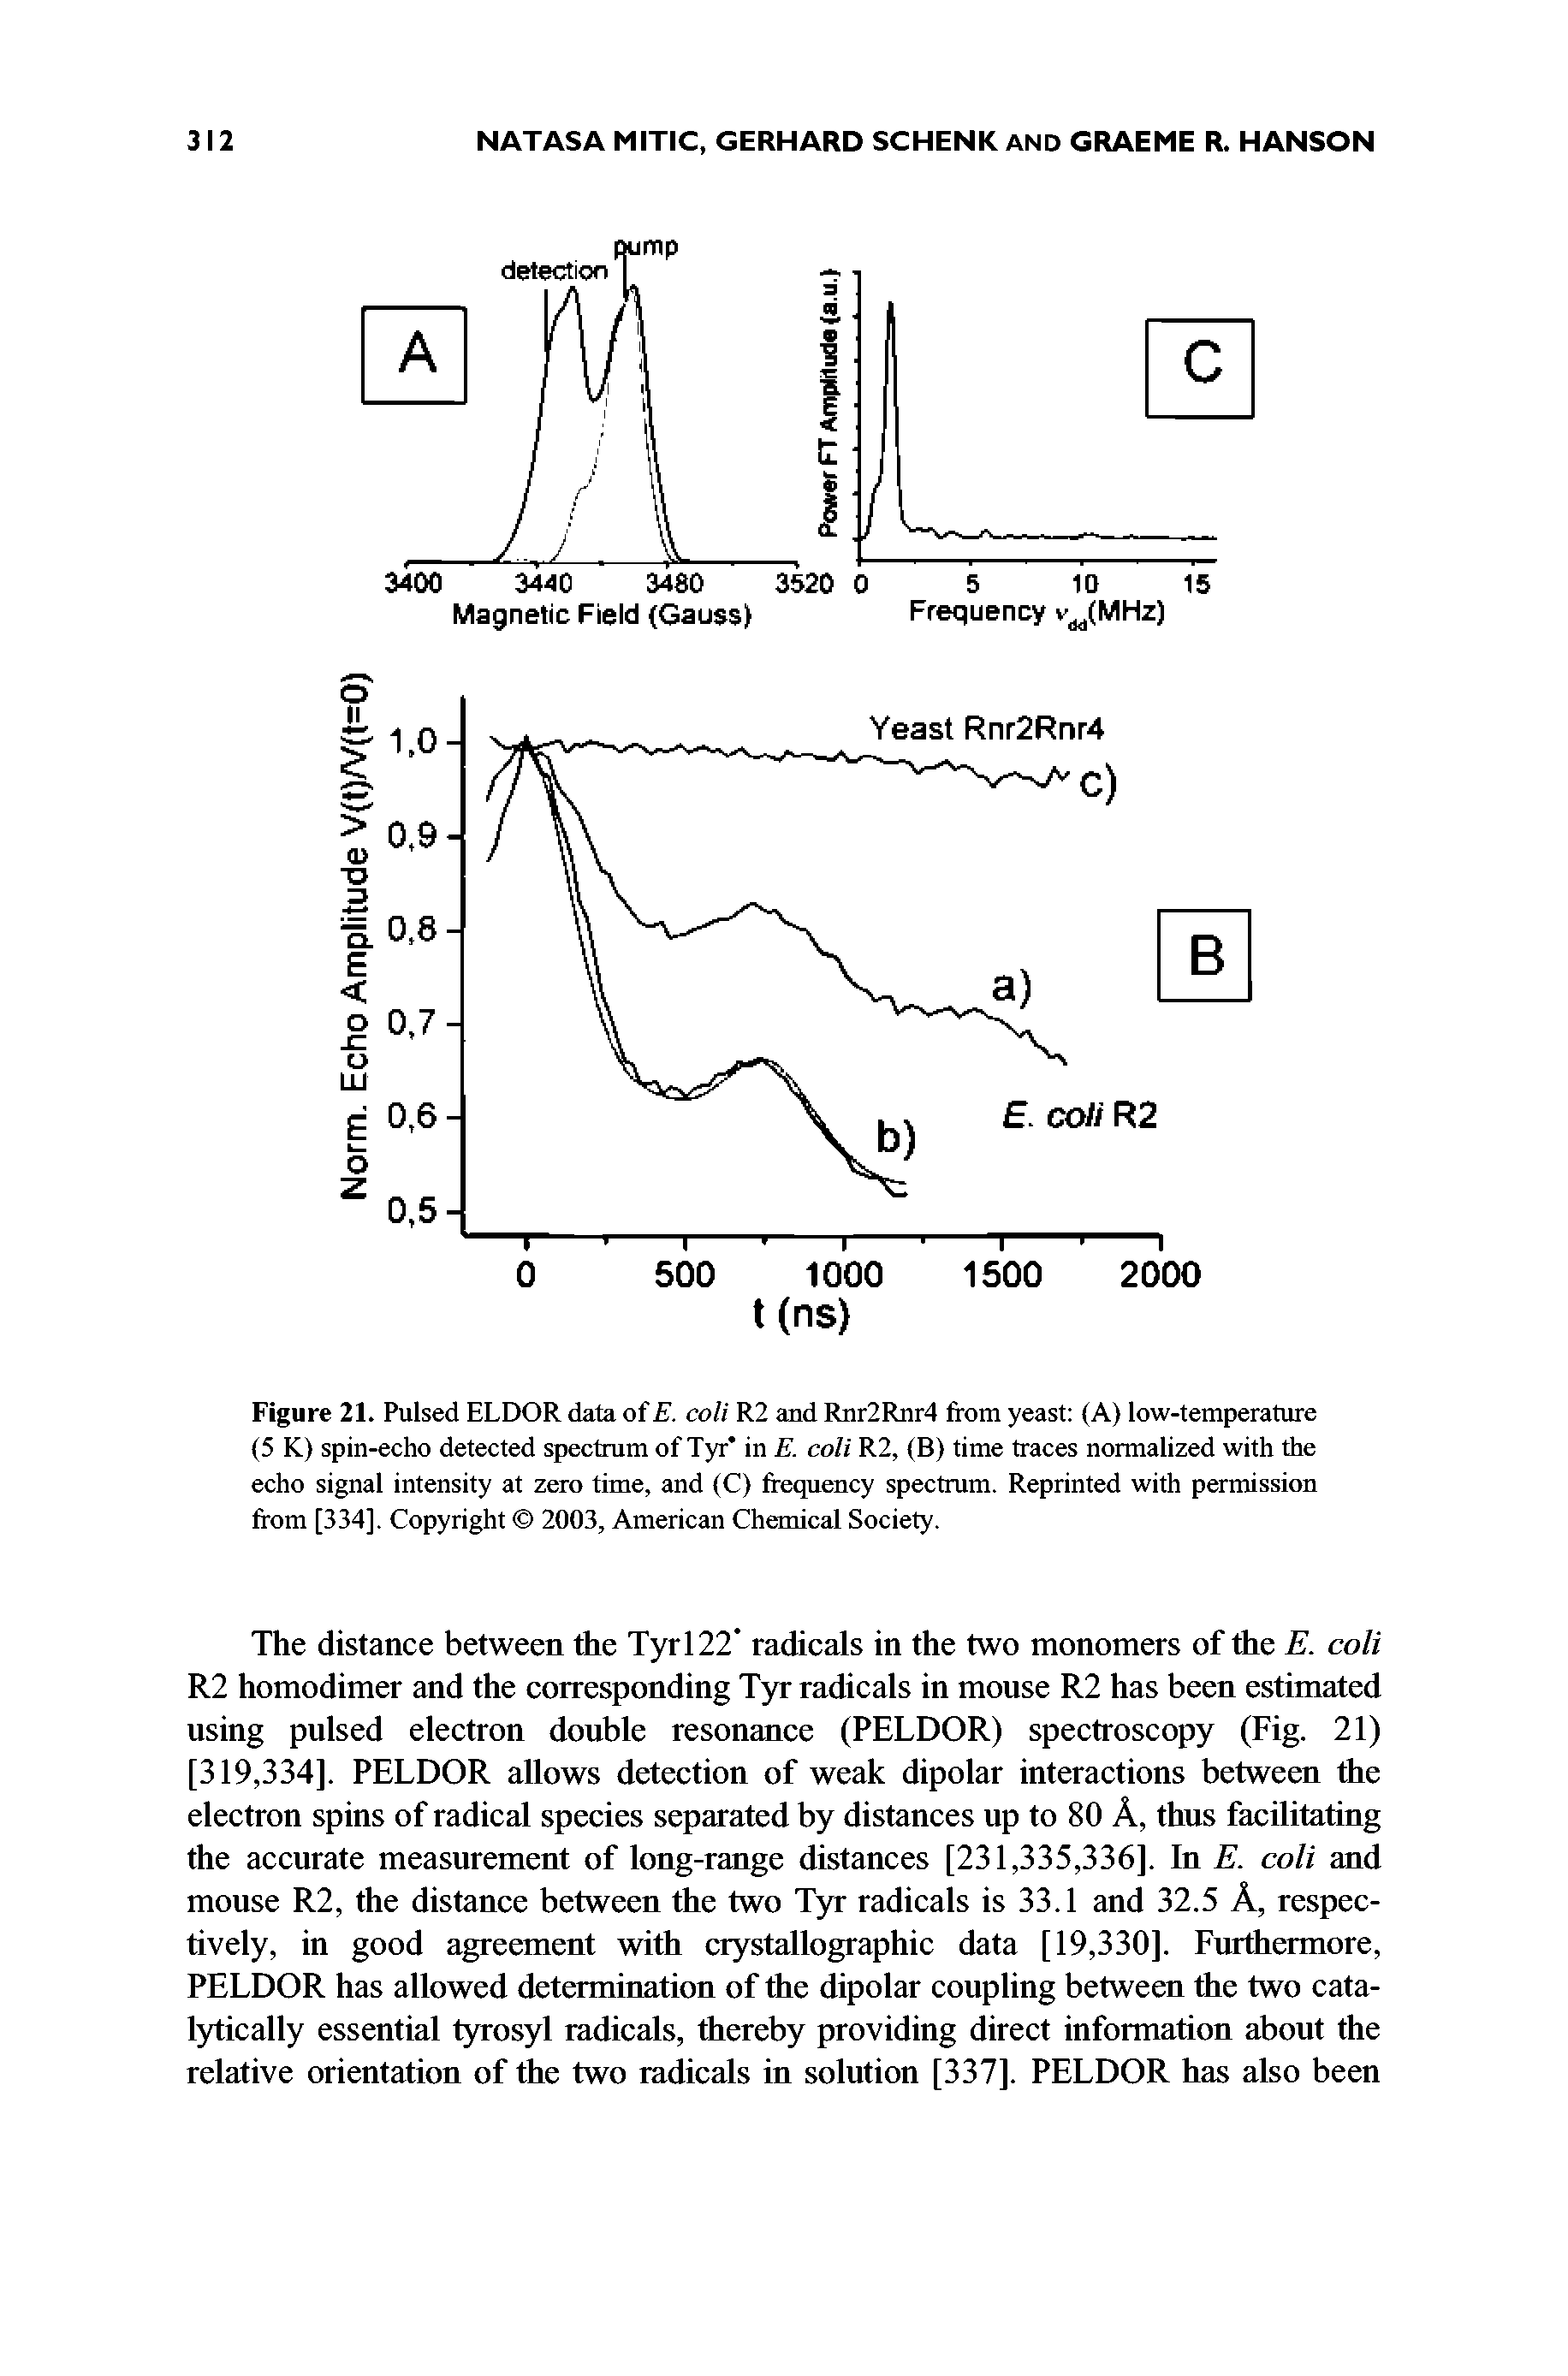 Figure 21. Pulsed ELDOR data of E. coli R2 and Rnr2Rnr4 from yeast (A) low-temperature (5 K) spin-echo detected spectrum of Tyr in E. coli R2, (B) time traces normalized with the echo signal intensity at zero time, and (C) frequency spectrum. Reprinted with permission from [334]. Copyright 2003, American Chemical Society.